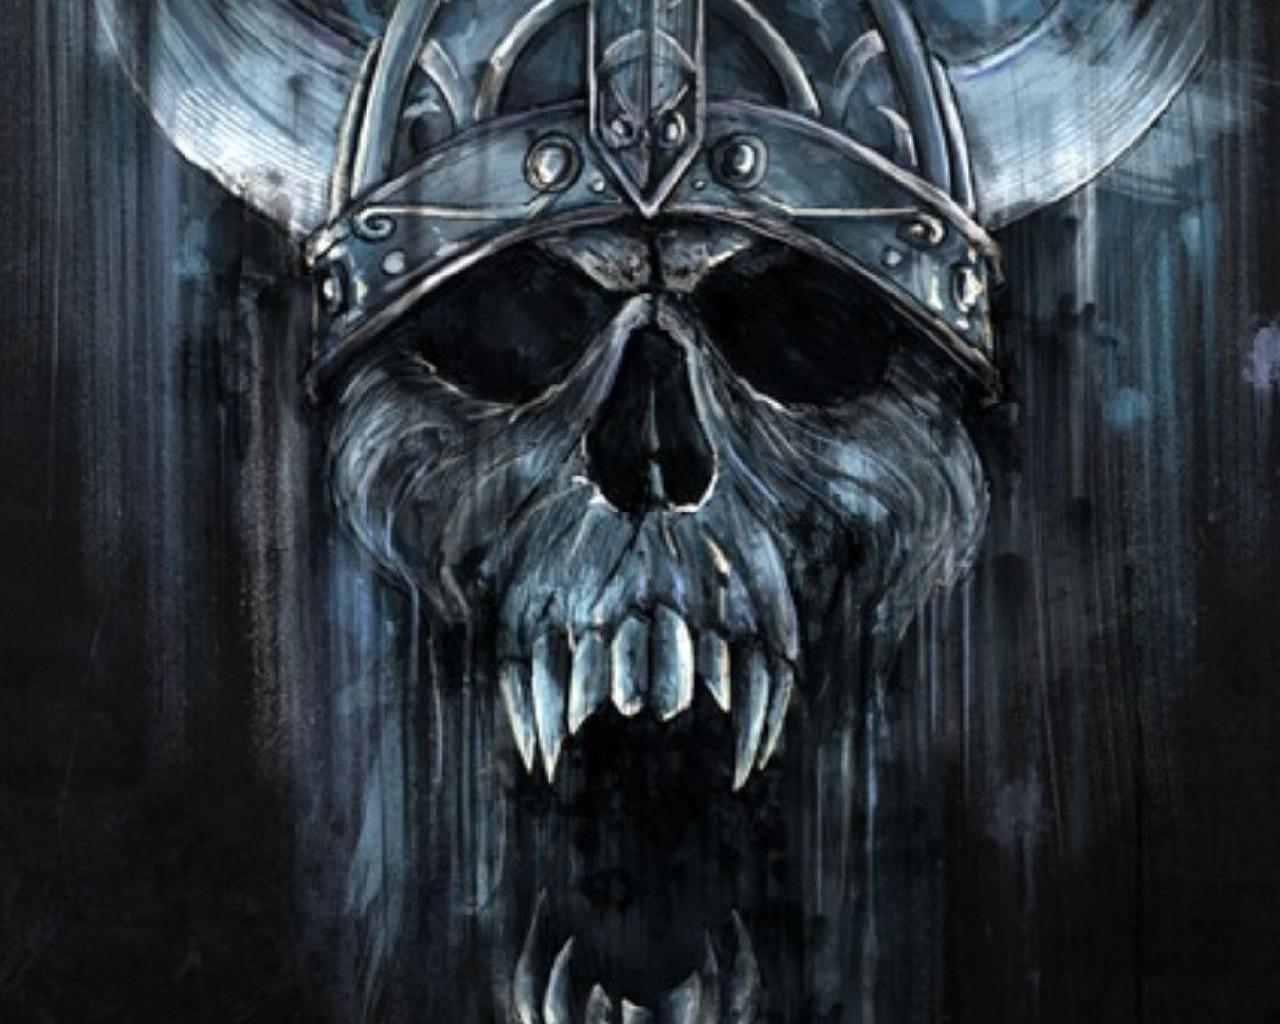 Hell Devil Death Skull Theme Wallpaper for Android